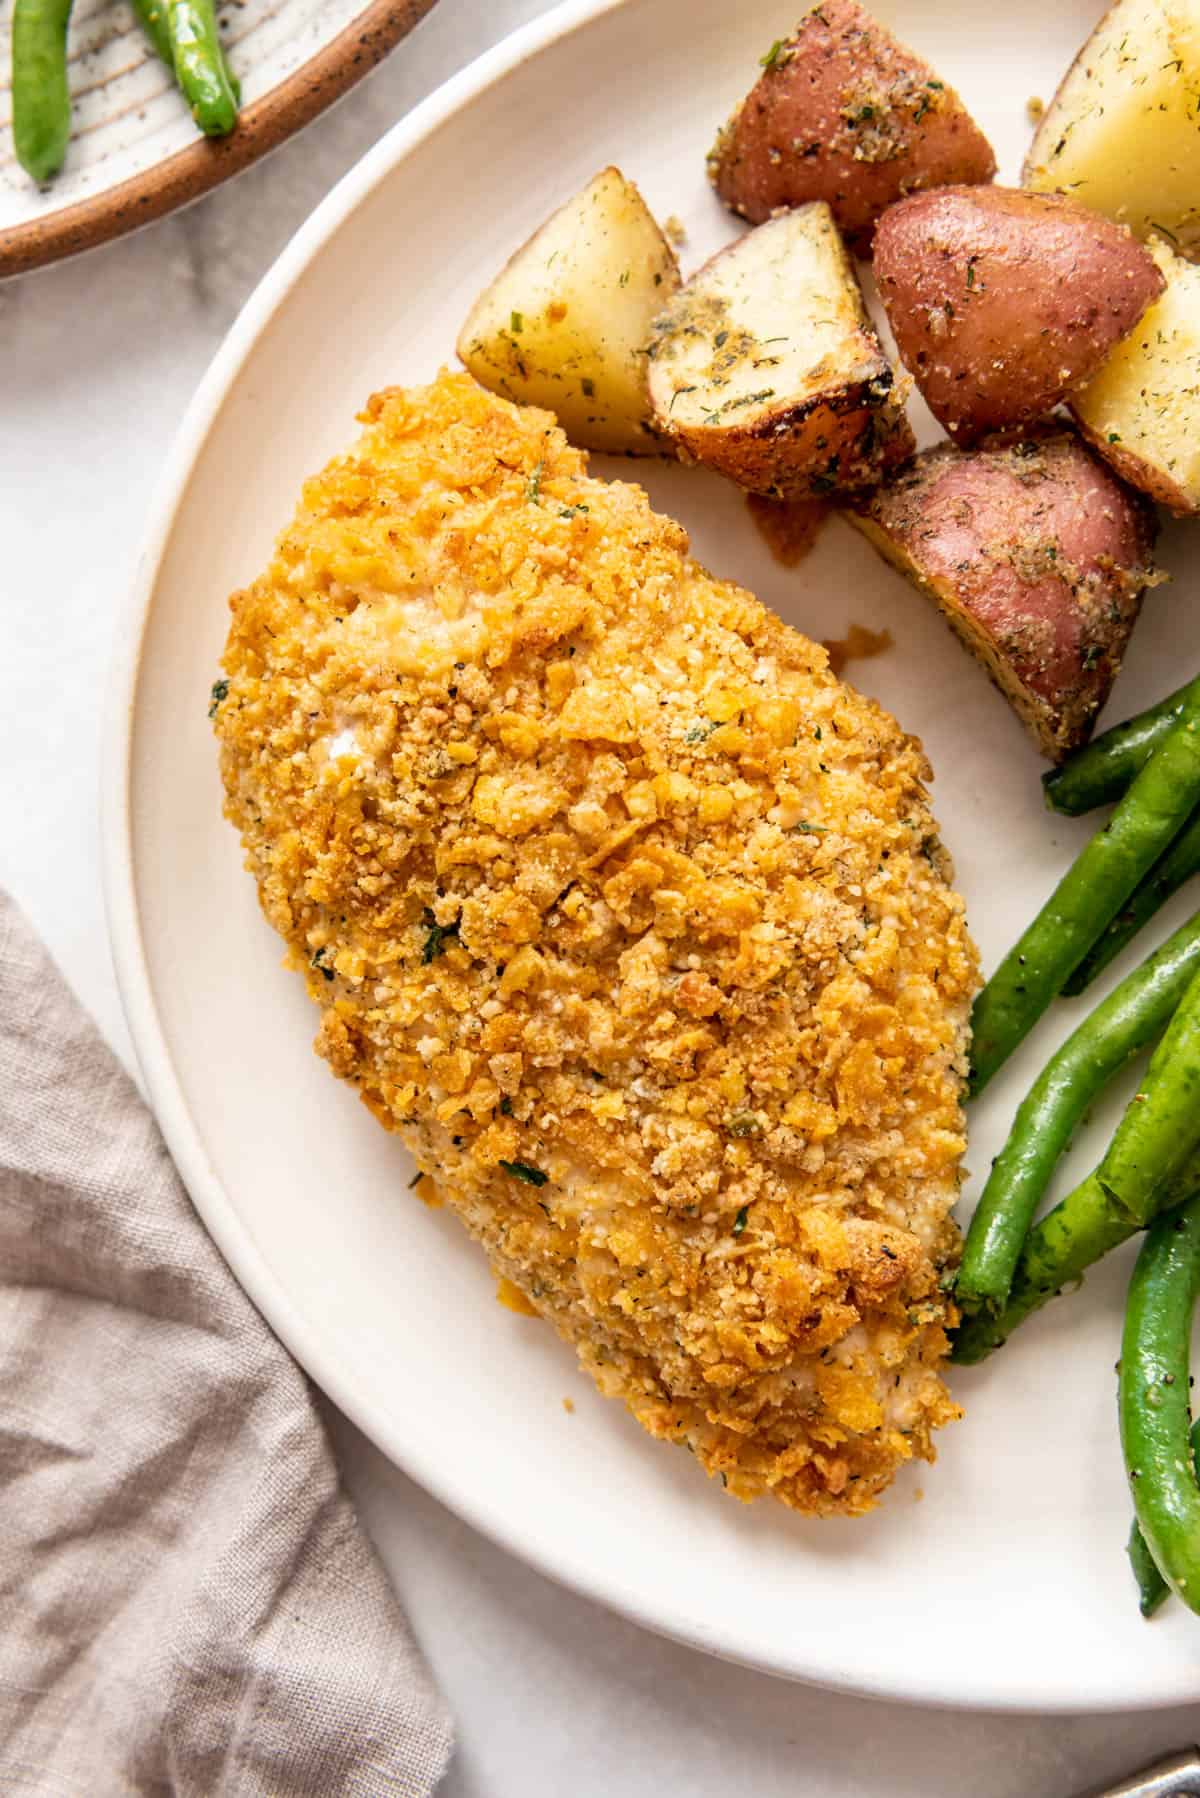 A cornflake and ranch seasoning crusted chicken breast on a plate with vegetables.